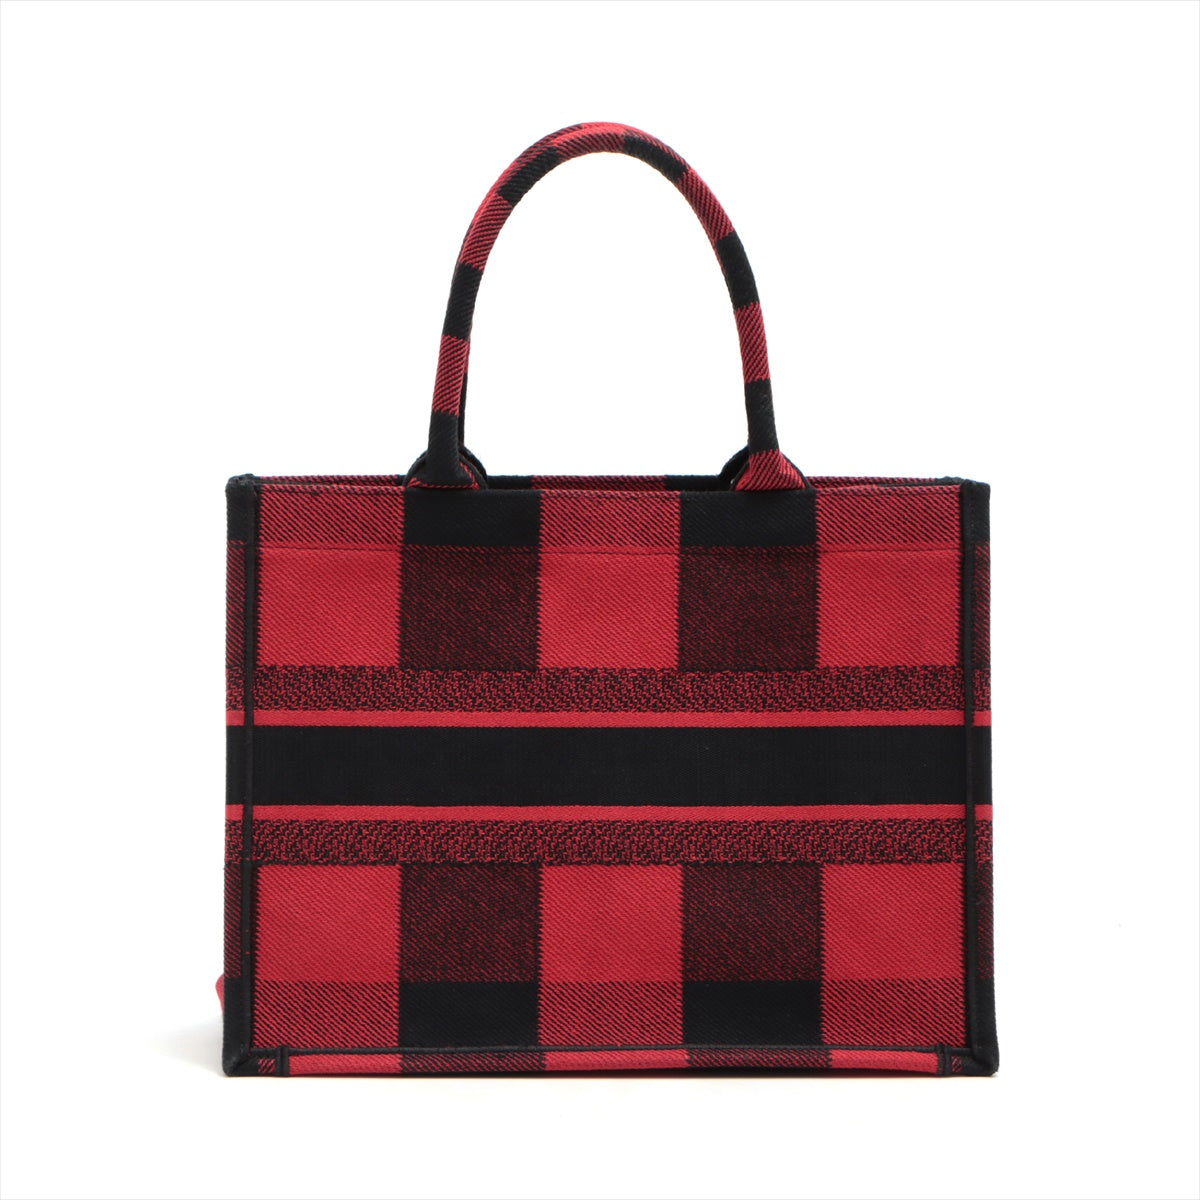 Christian Dior Book Tote canvass Tote bag Red